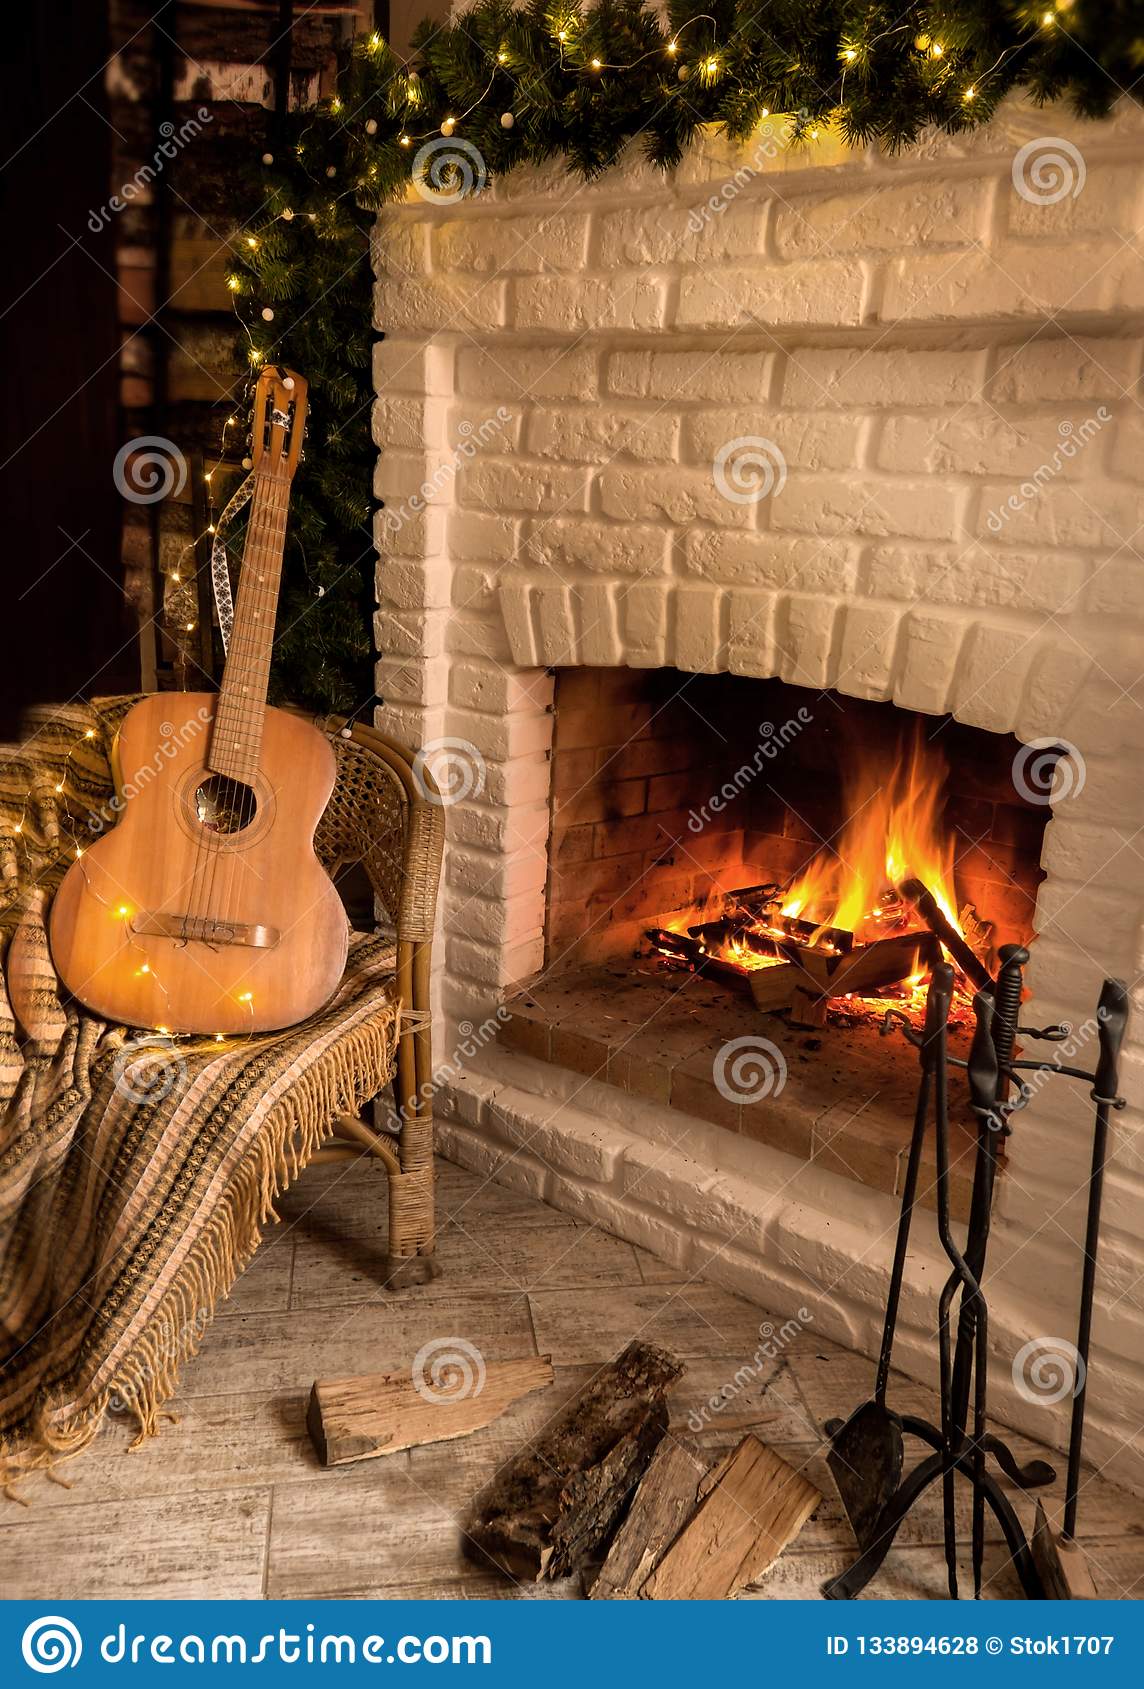 Portable Indoor Fireplace Best Of Burning Fireplace Beautiful Fire Next to the Chair with A